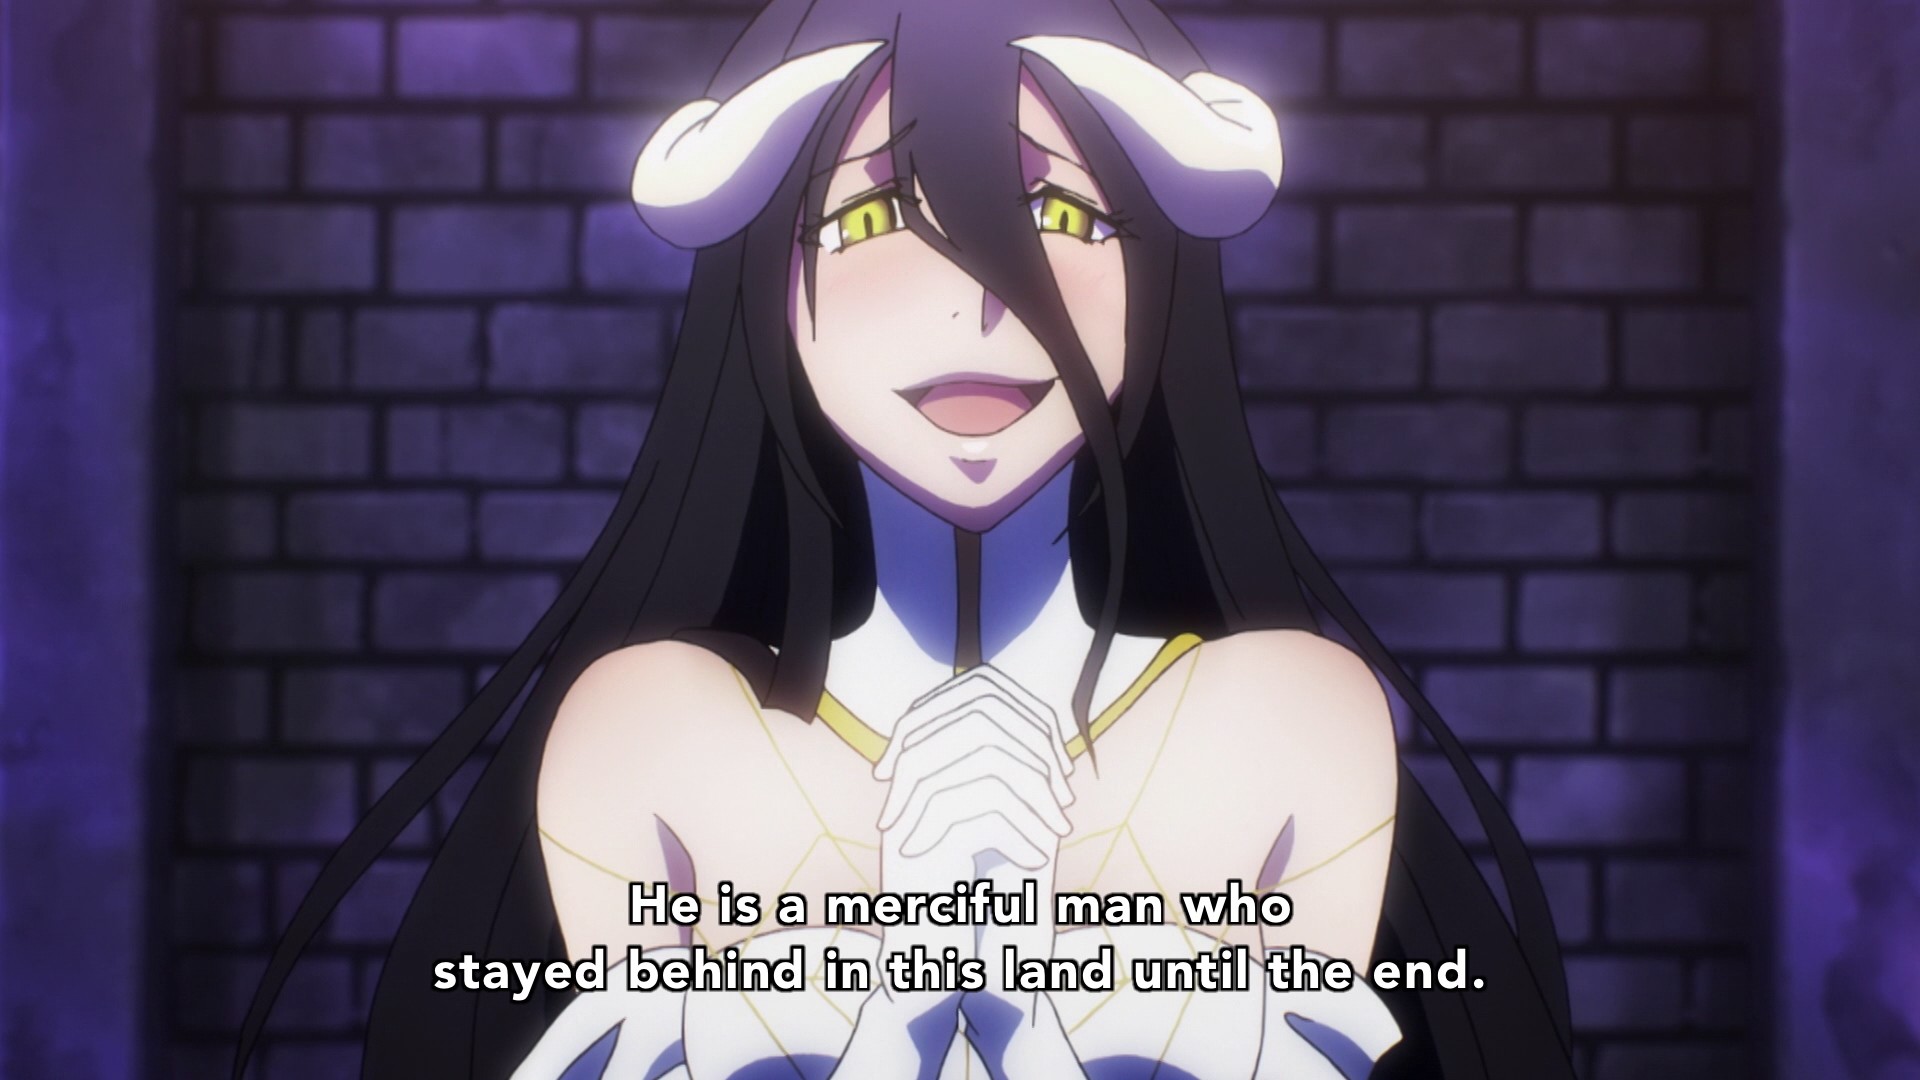 1920x1080 Albedo also mentions Momonga staying "until the end." Demiurge notices that  Shalltear still hasn't risen from her kneeling position.